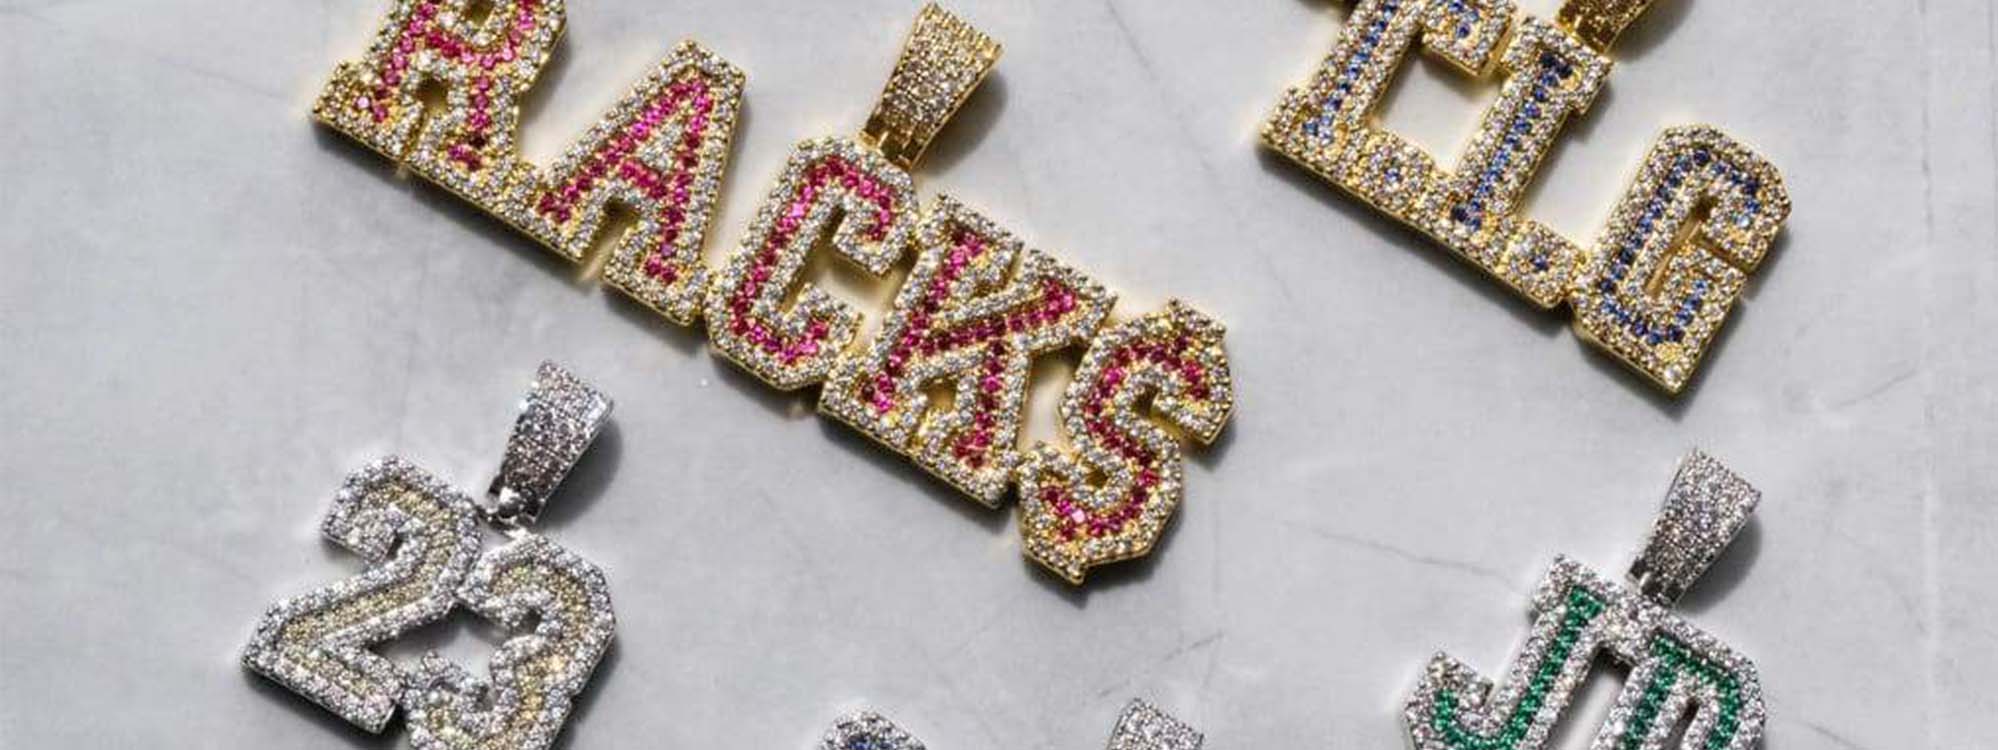 Check Out Quavo Flexing His Insane Jewelry Collection